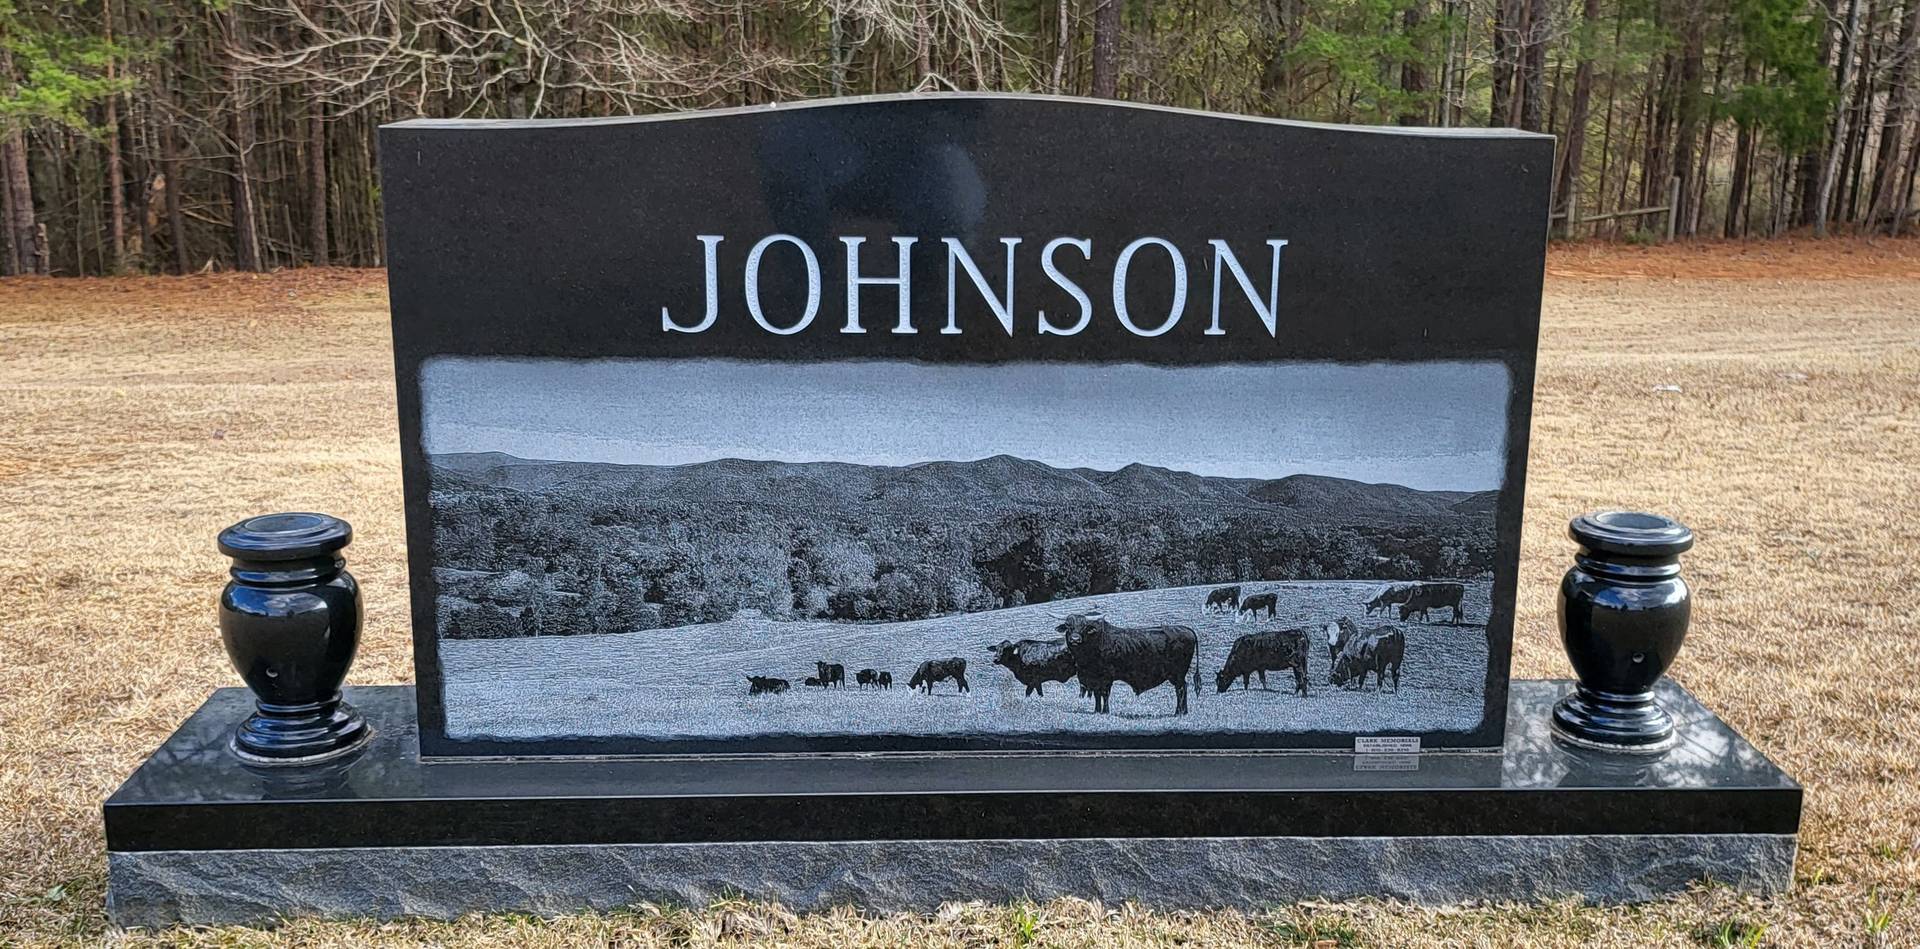 A memorial slab with the name and illustration by the text Johnson with cattle picture